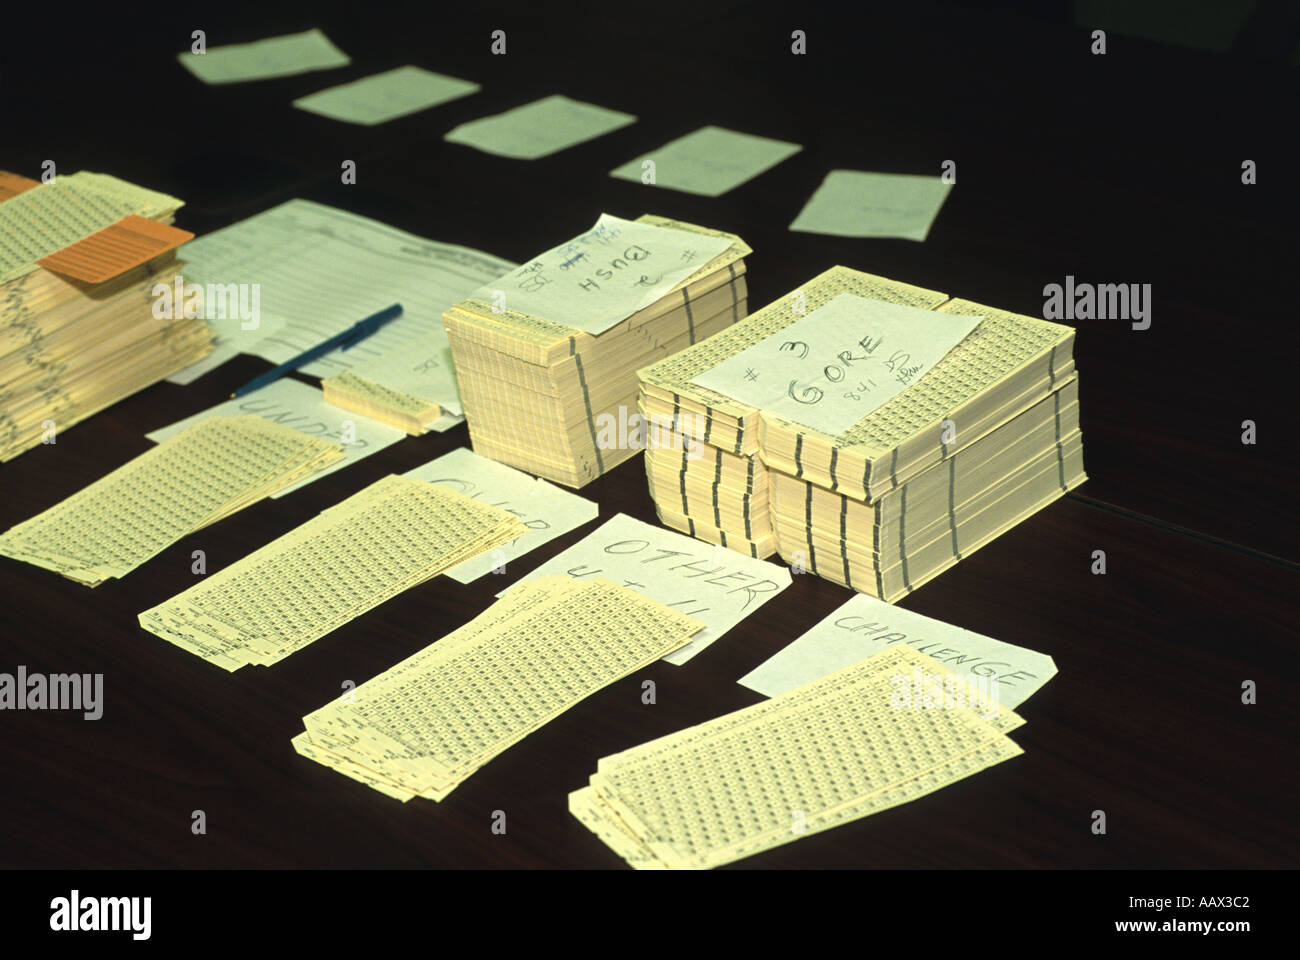 Florida Fort Lauderdale Recounted ballots stacked during the 2000 US presidential elections  Stock Photo